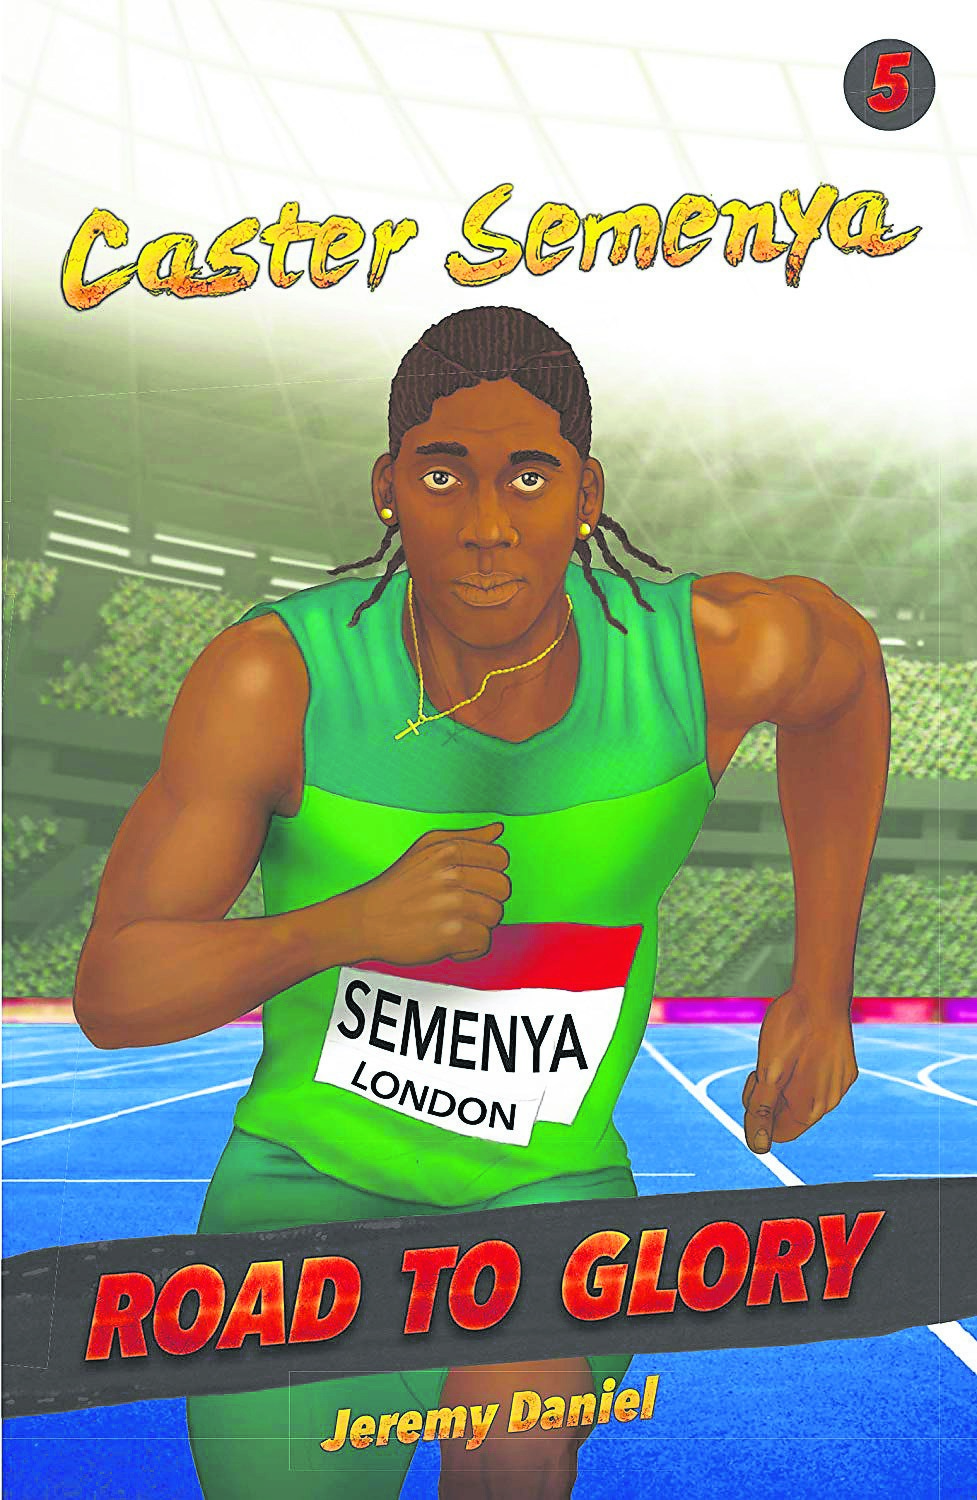 The book on Caster Semenya is the first book in the Road to Glory series to feature a female athlete. Picture: Supplied